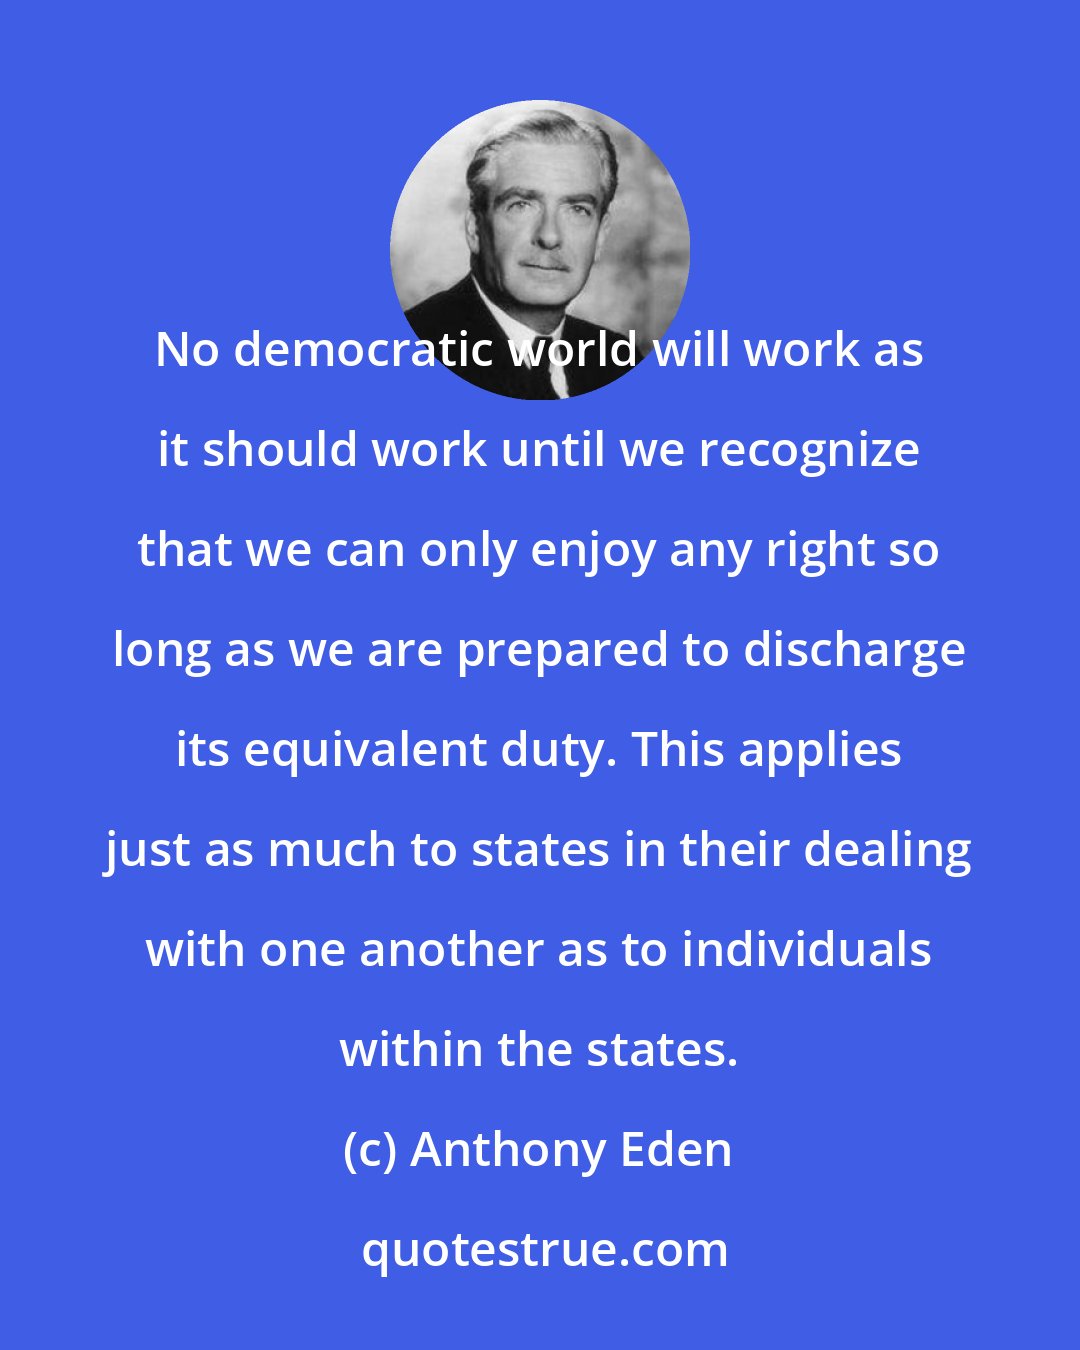 Anthony Eden: No democratic world will work as it should work until we recognize that we can only enjoy any right so long as we are prepared to discharge its equivalent duty. This applies just as much to states in their dealing with one another as to individuals within the states.